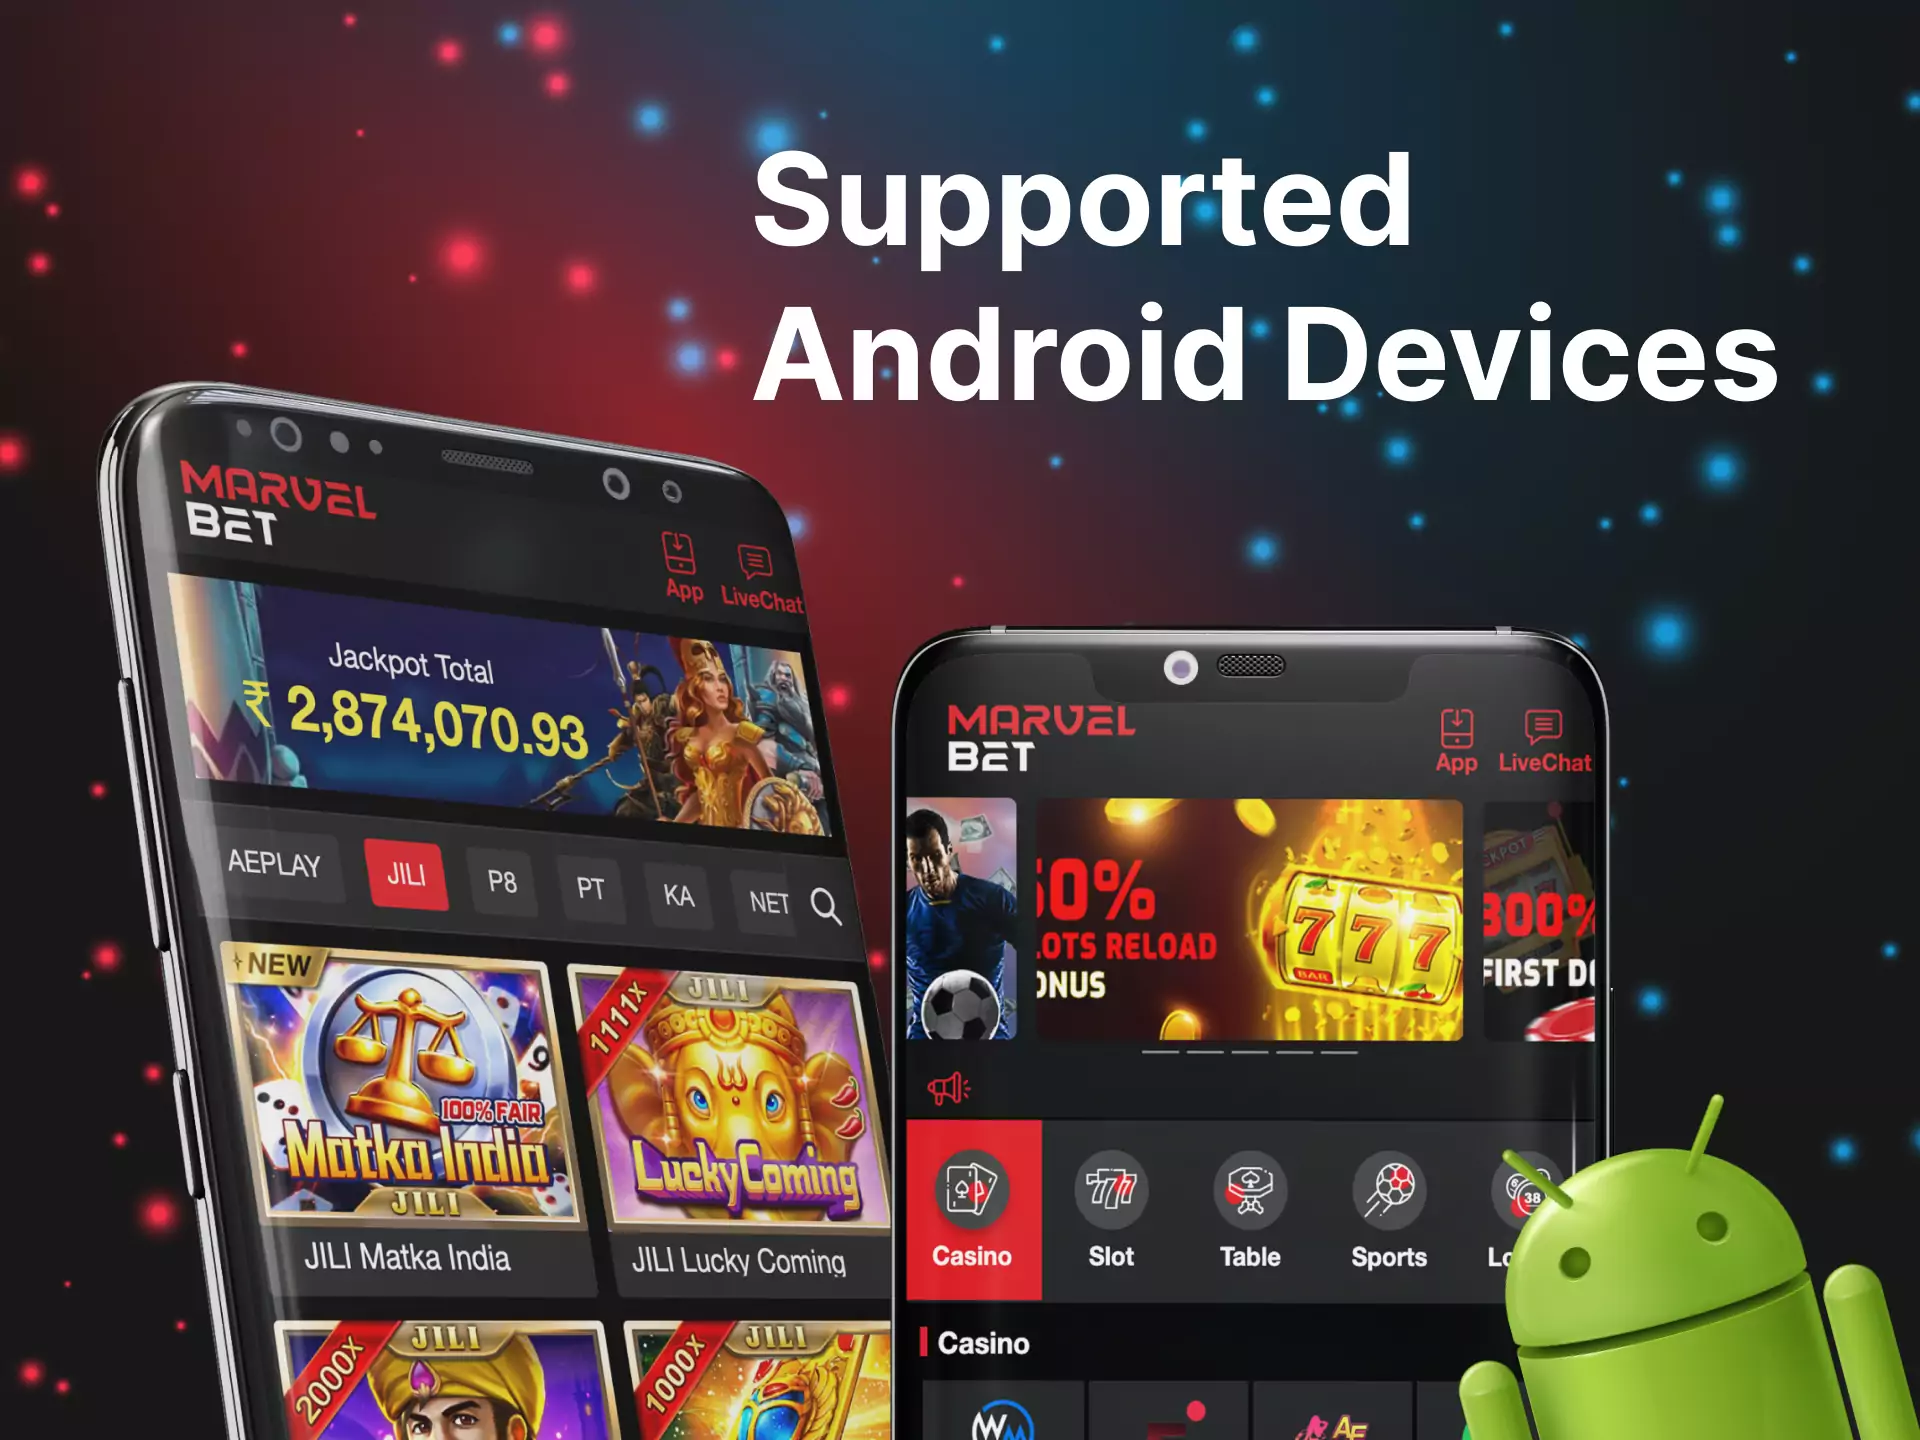 The Marvelbet app greatly works on any Android device.